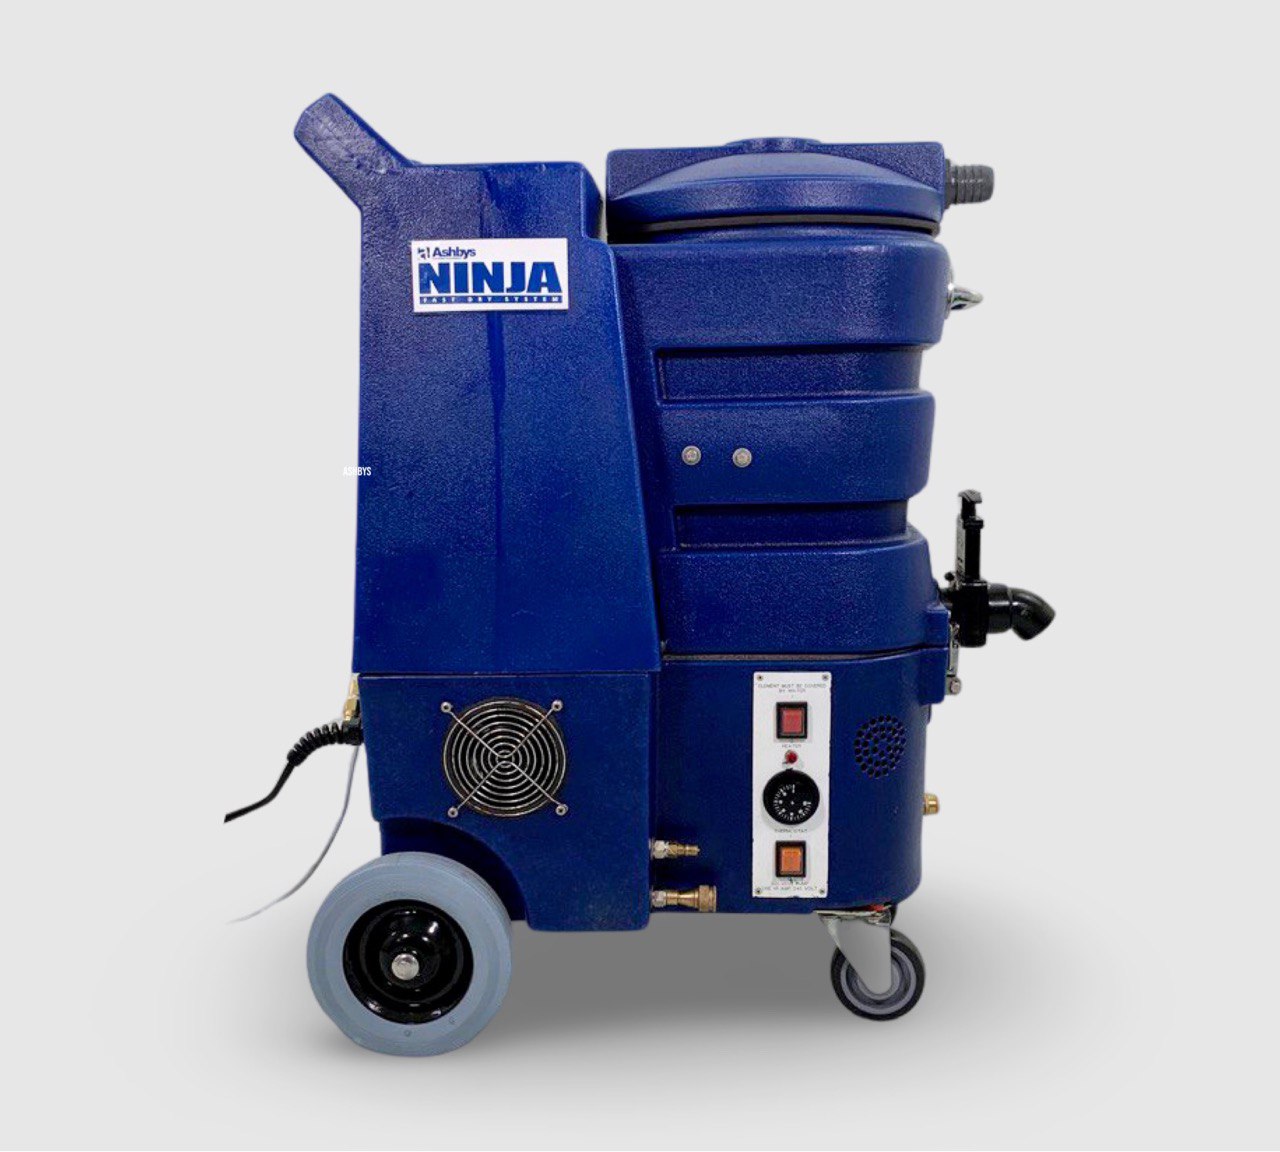 Pre-owned Ninja Carpet Cleaner | 250 psi | 3 Stage 5.7" STD + 5.7" HD PERFORMANCE Vacs | Built-in Tank Heater | Hot Solvent Cleaning System